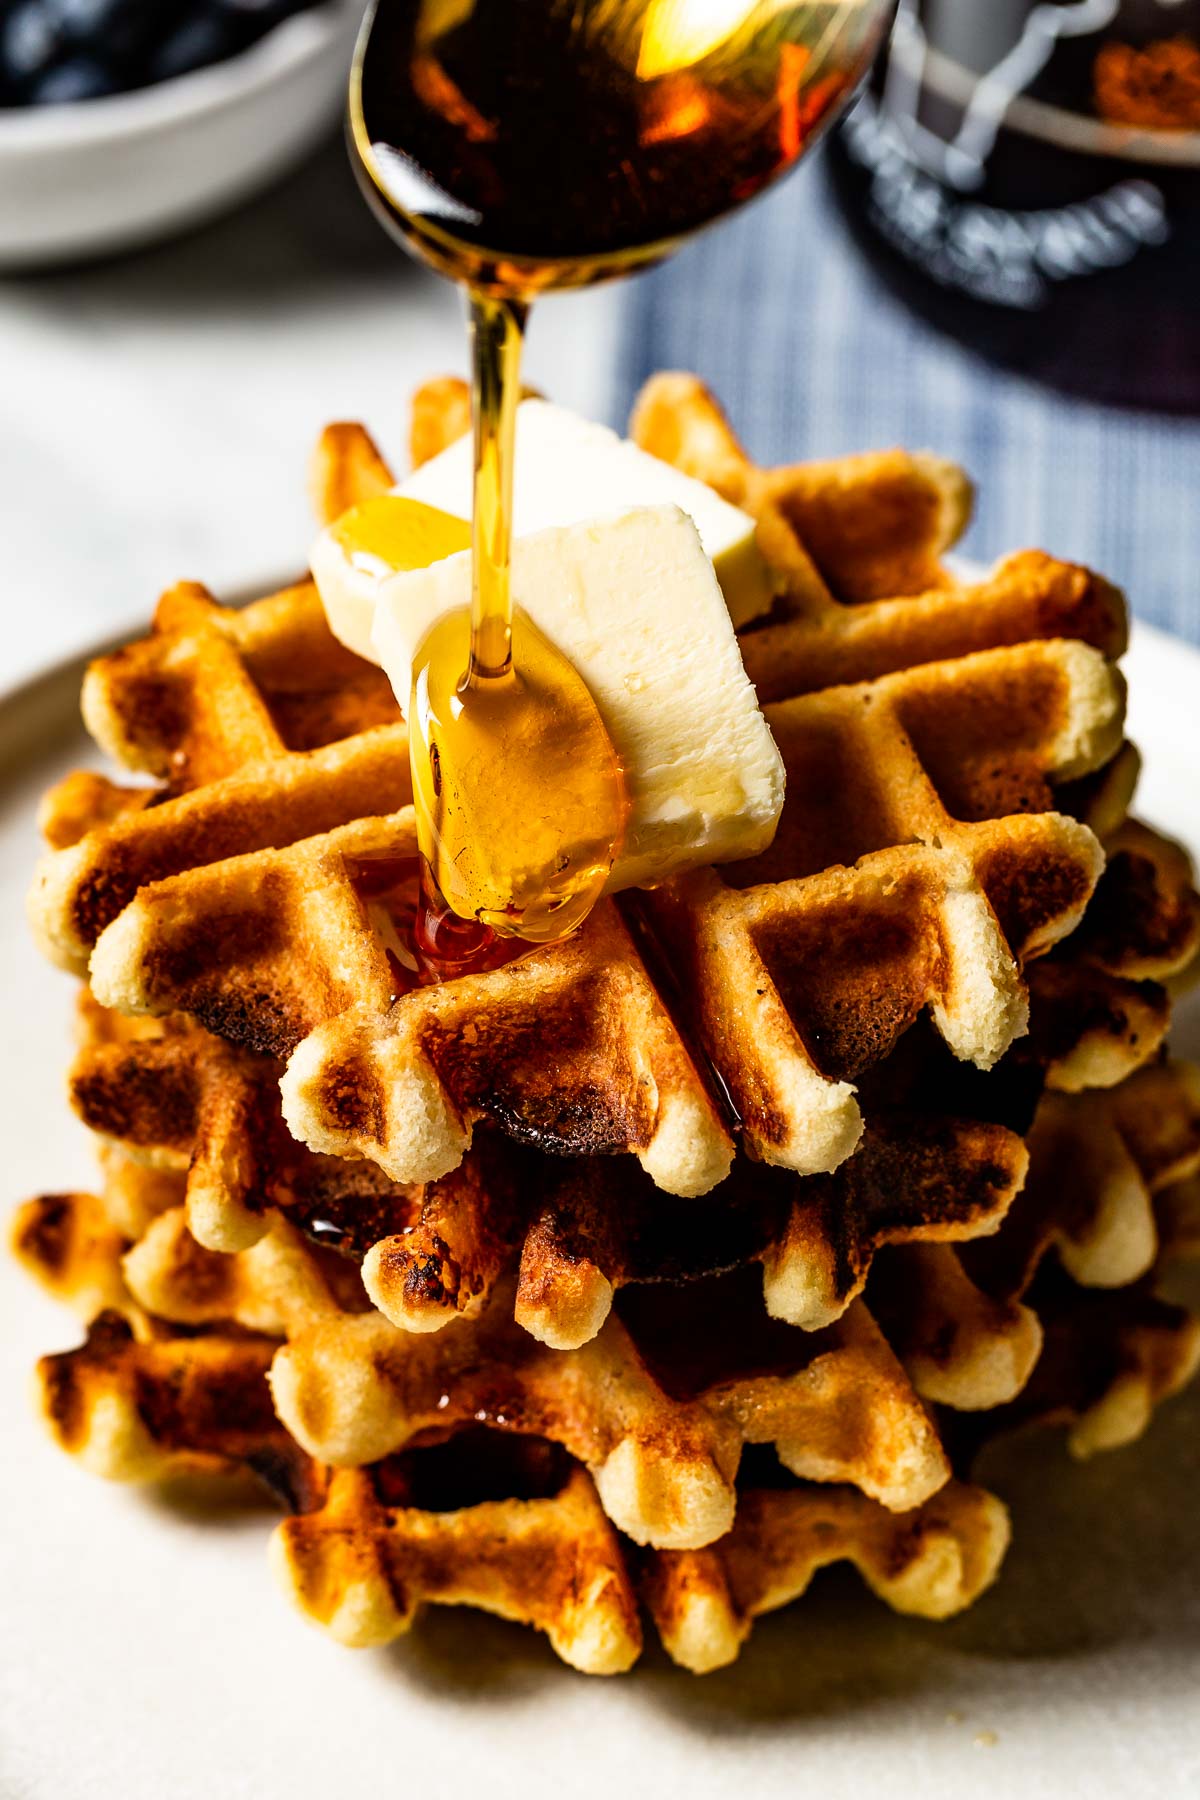 Almond flour waffles topped off with butter and being drizzled with syrup.